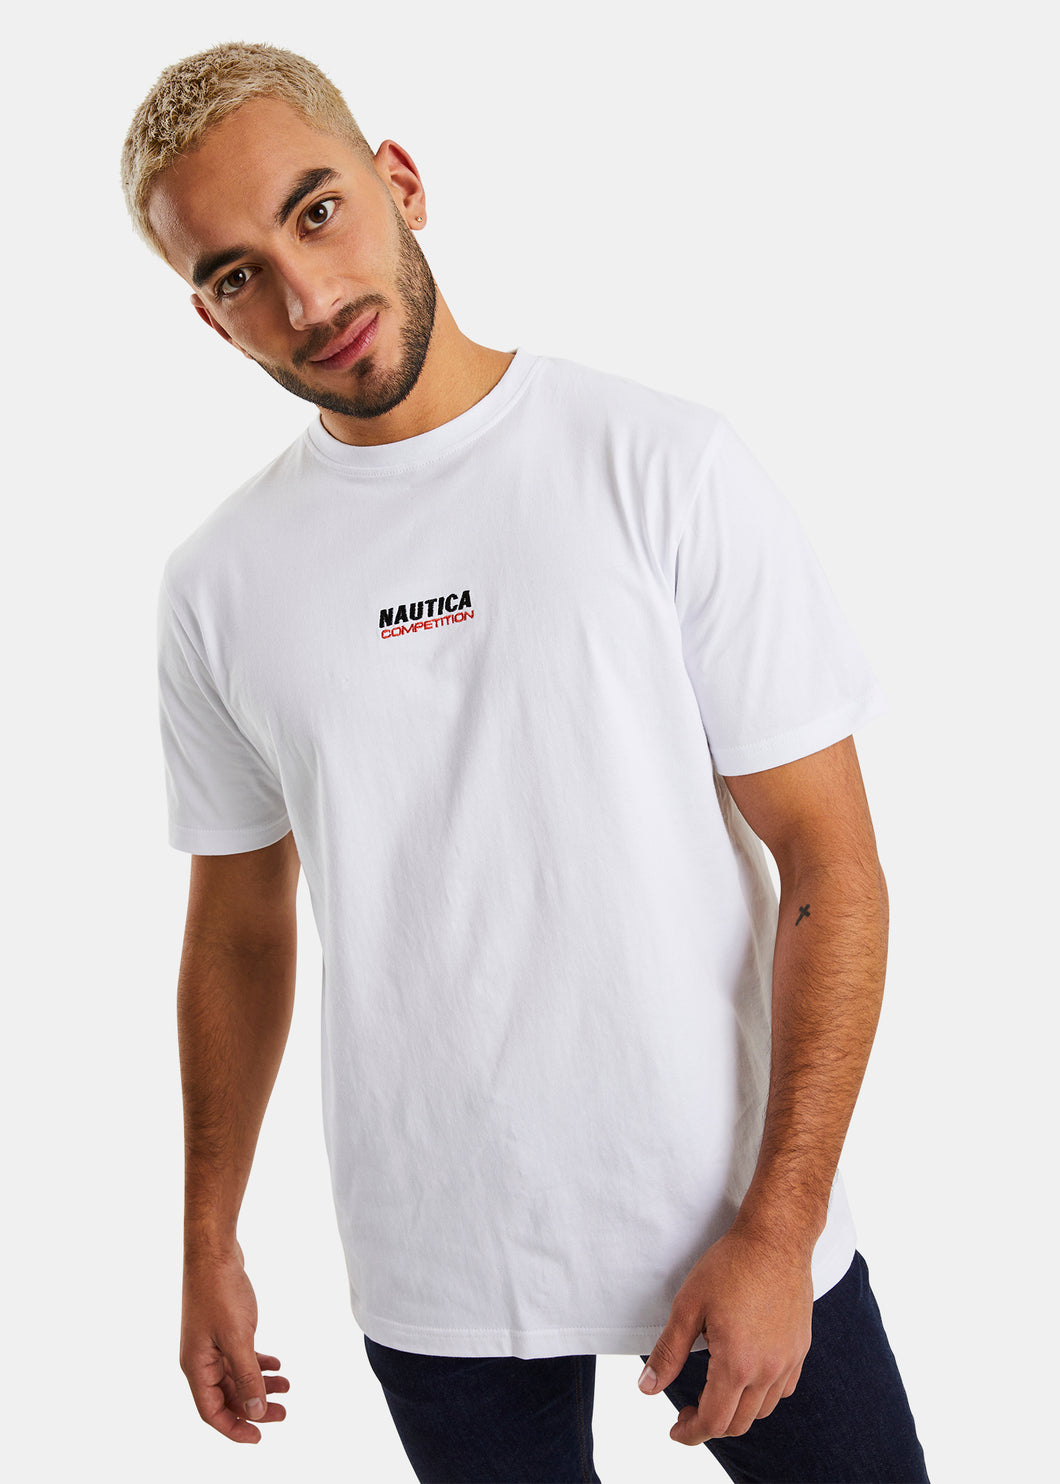 Nautica Competition Fesler T-Shirt - White - Front